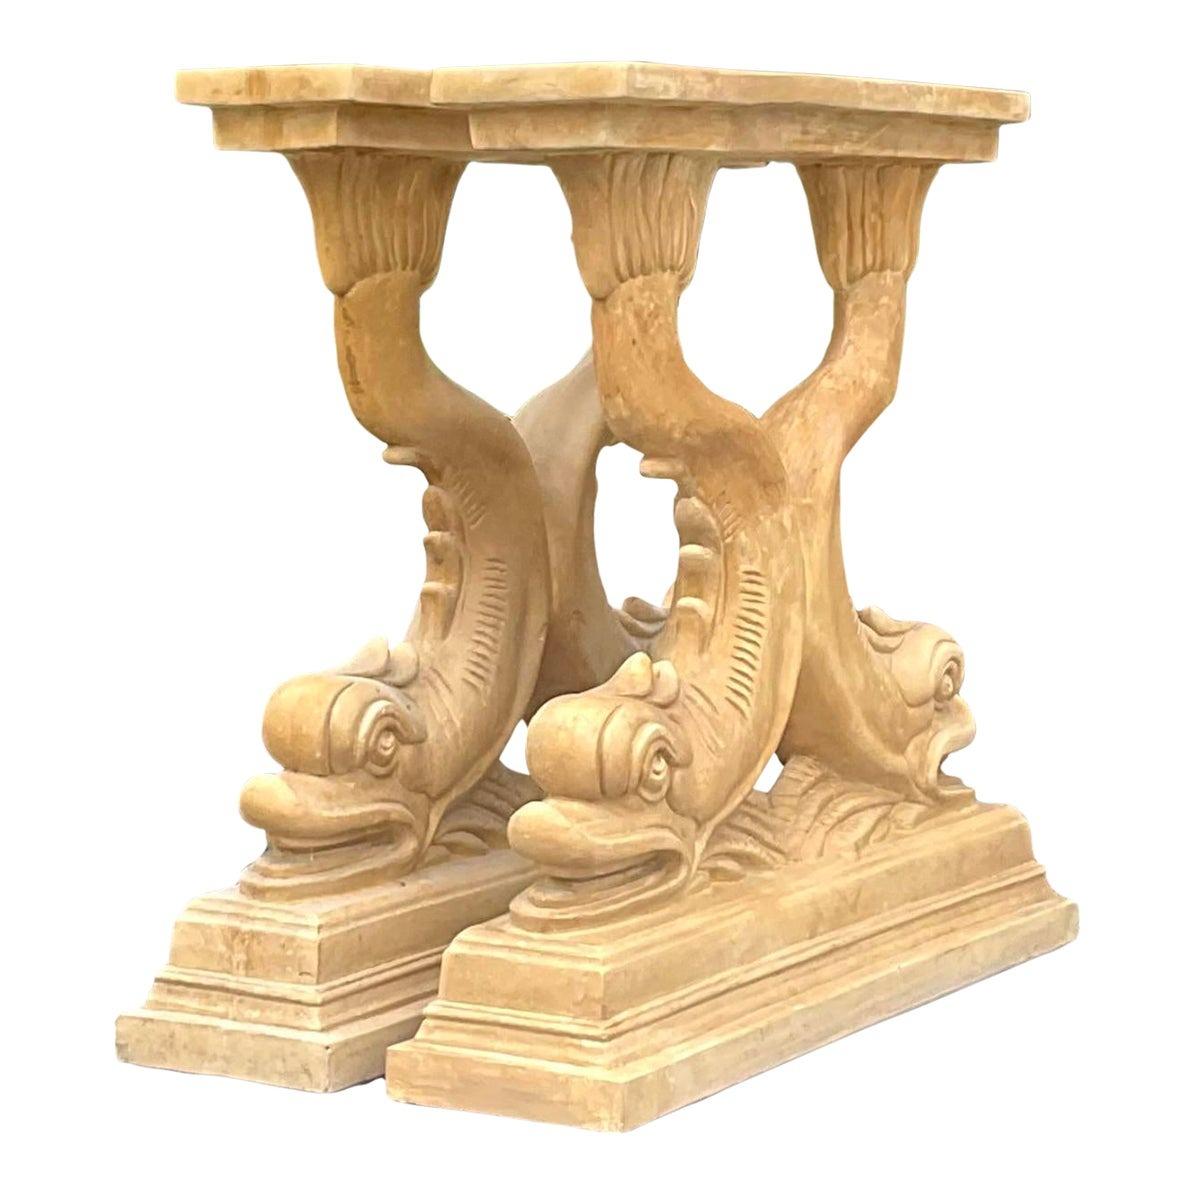 North American Late 20th Century Vintage Coastal Plaster Dolphin Pedestals - a Pair For Sale